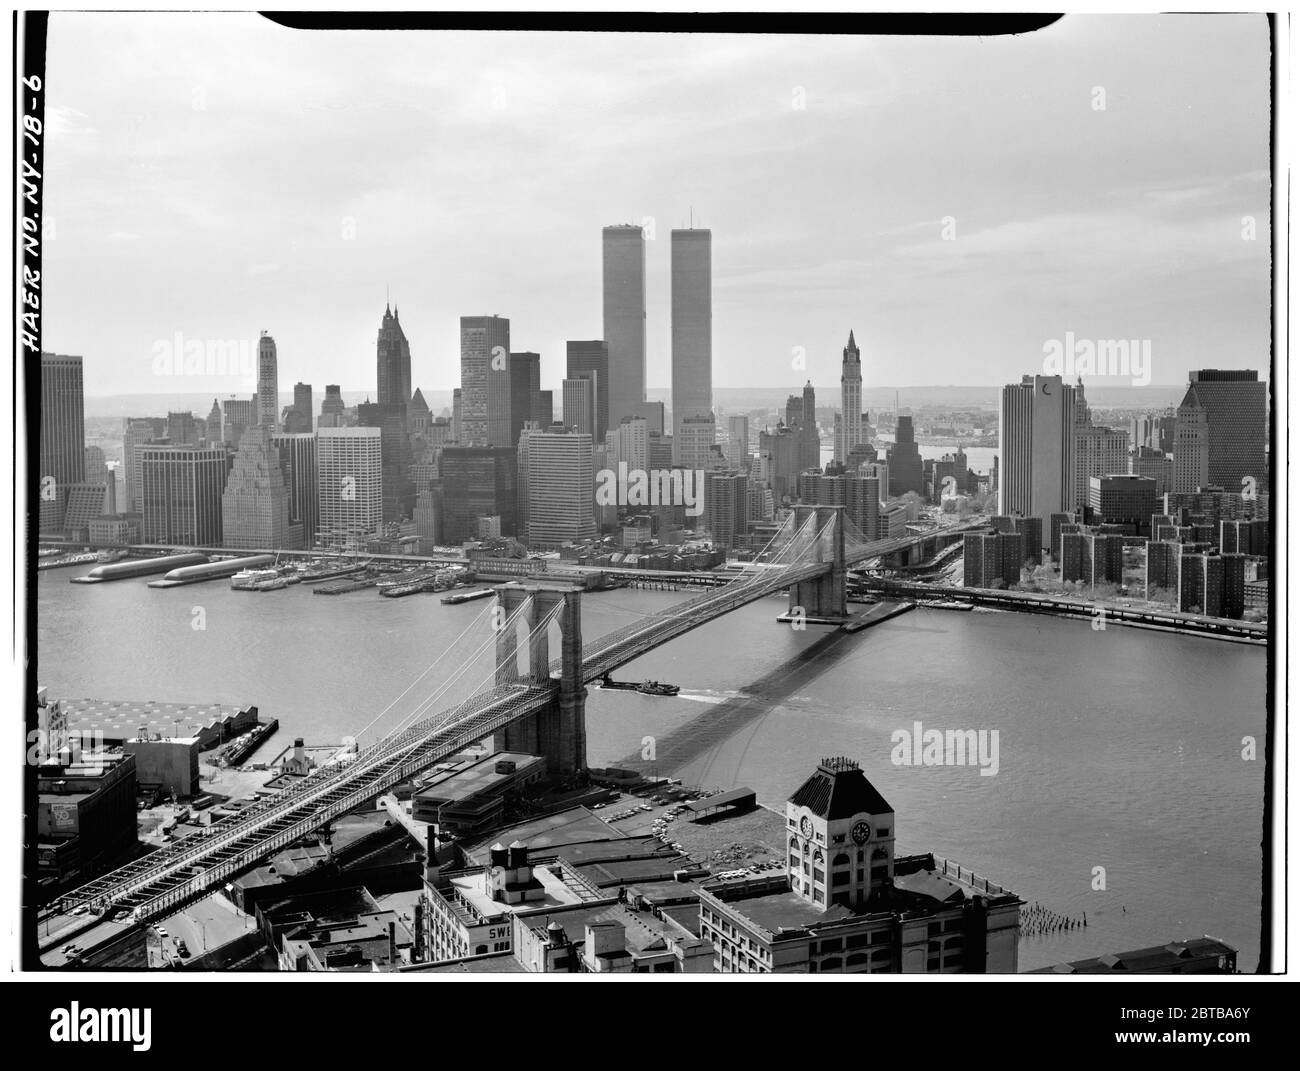 1978 , NEW YORK , USA :  View looking W towards Manhattan. - Brooklyn Bridge, Spanning East River between Park Row, Manhattan and Sands Street, Brooklyn, New York, New York County, NY.  The great East River suspension bridge, opened the day 24 may 1883 -- Connecting the cities of New York and Brooklyn  . Photo by Jack Boucher  ( images made by the U.S. Government ) - BROOKLYN BRIDGE - PONTE DI BROOKLYN - FOTO STORICHE - HISTORY - GEOGRAFIA - GEOGRAPHY  - landscape - paesaggio - veduta - panorama - fiume Hudson river  - landscape  - TORRI GEMELLE - TWIN TOWERS  --- NOT FOR ADVERTISING USE ----N Stock Photo